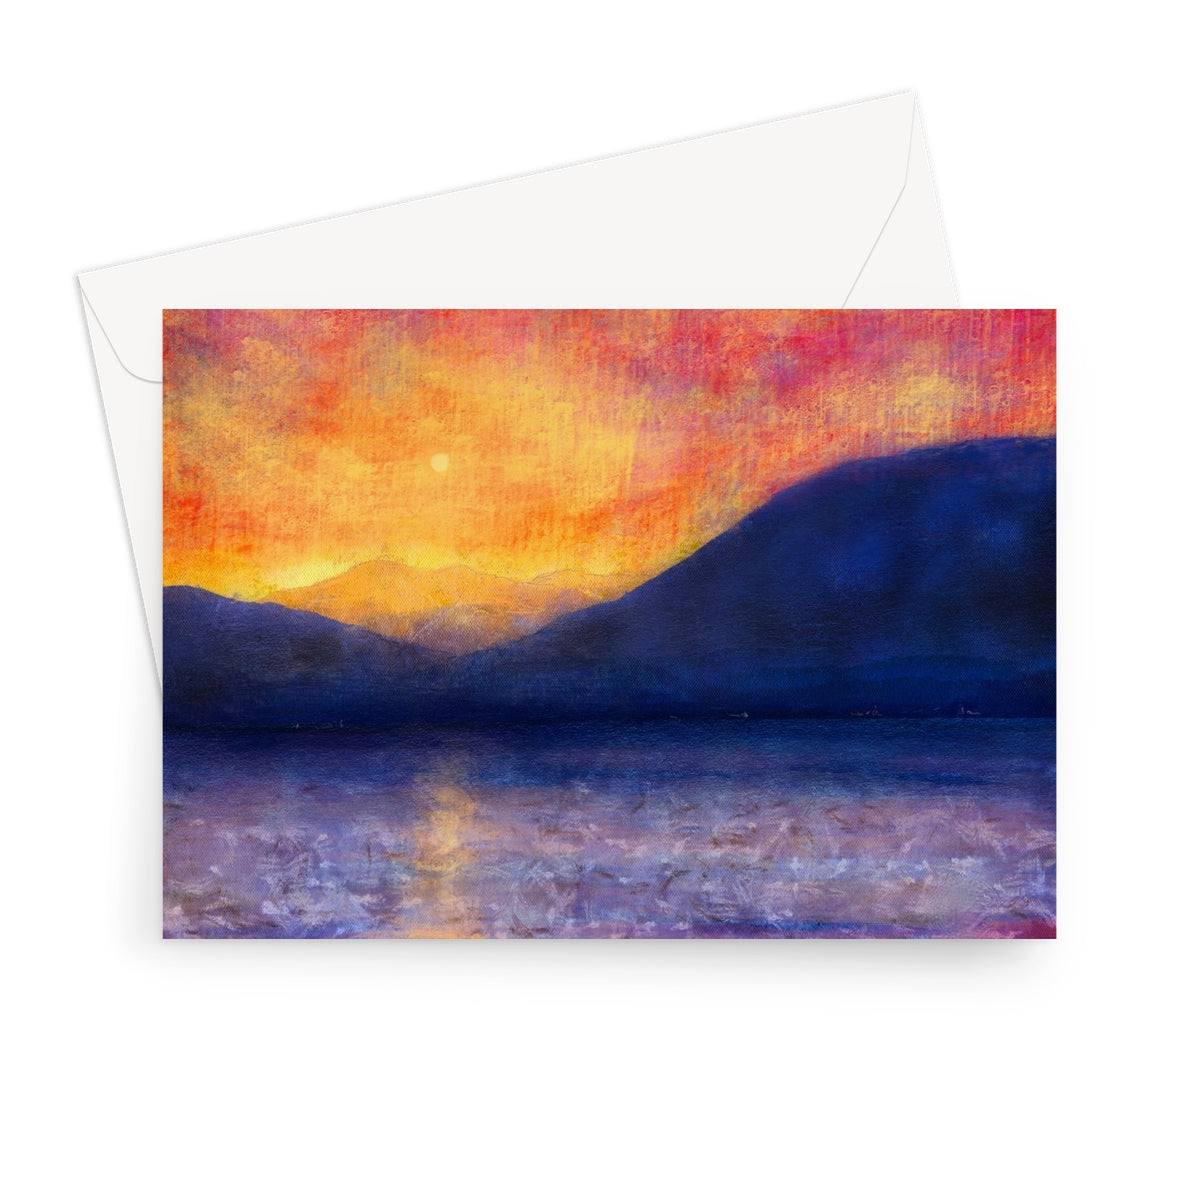 Sunset Approaching Mull Art Gifts Greeting Card-Greetings Cards-Hebridean Islands Art Gallery-7"x5"-10 Cards-Paintings, Prints, Homeware, Art Gifts From Scotland By Scottish Artist Kevin Hunter